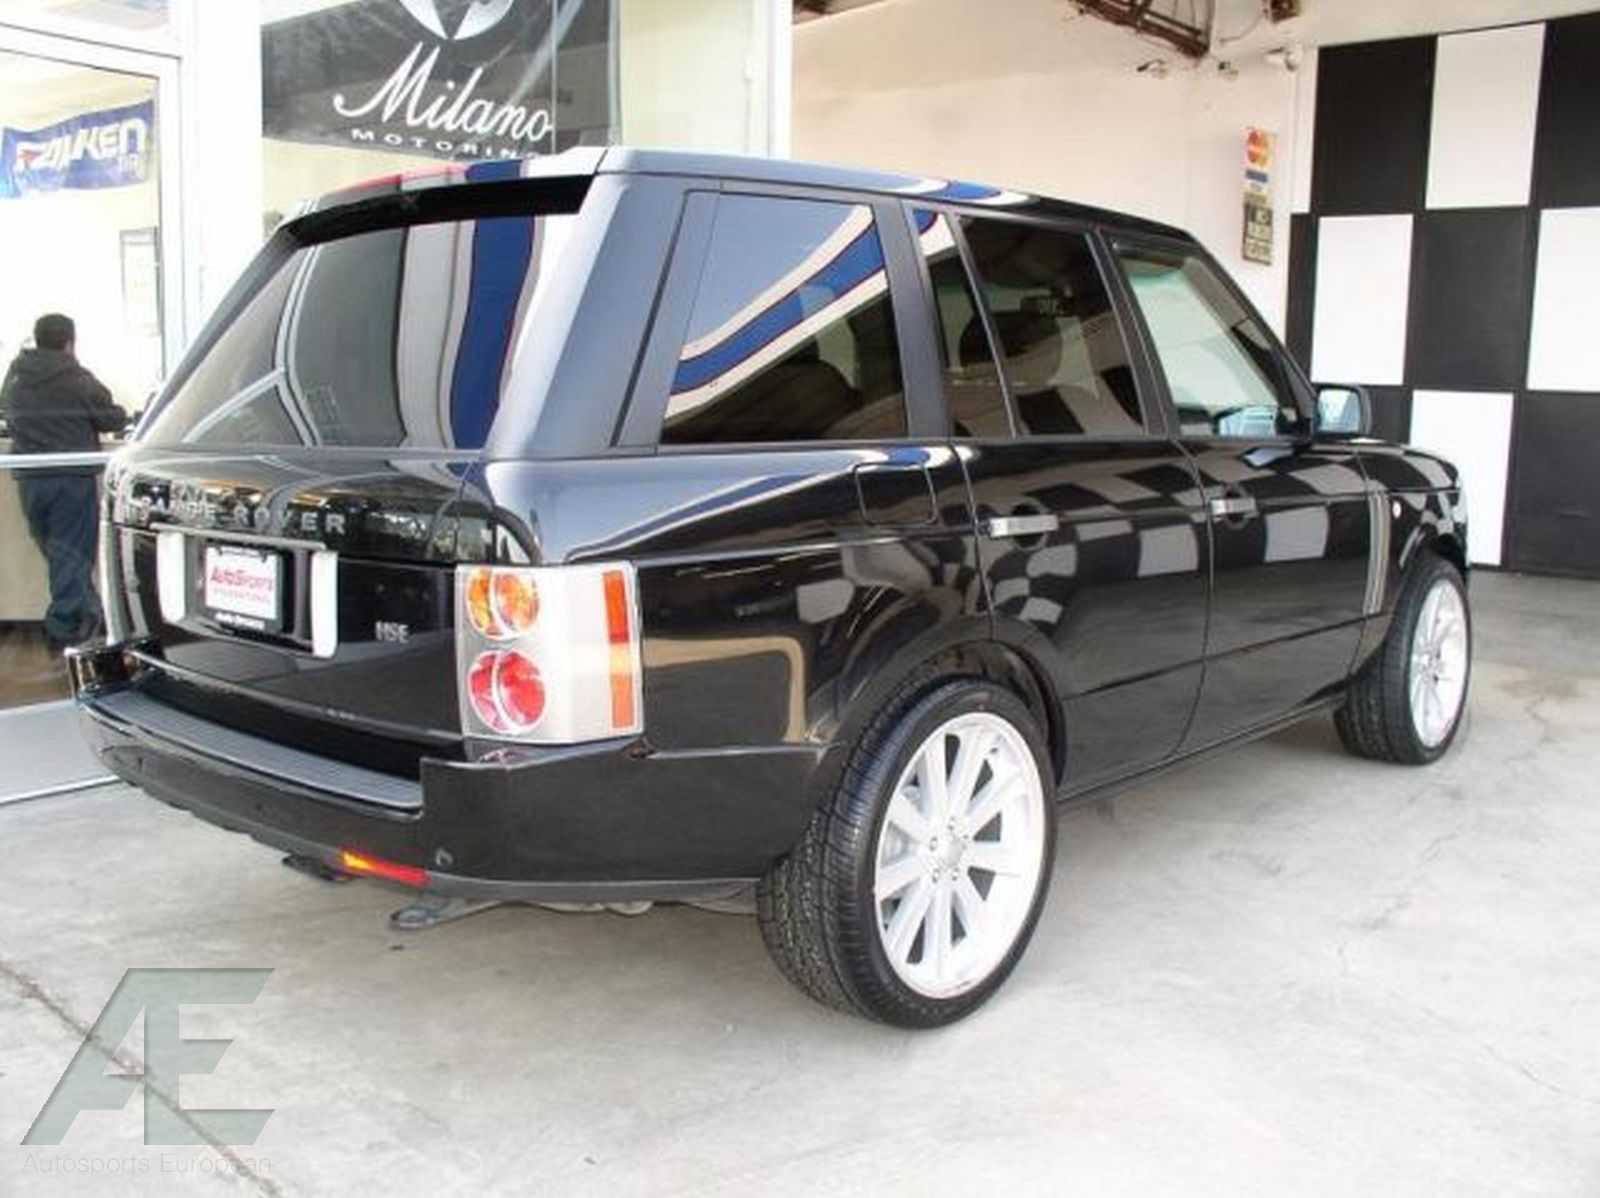 20 Wheels Rims Tires Range Rover HSE Sport Supercharged